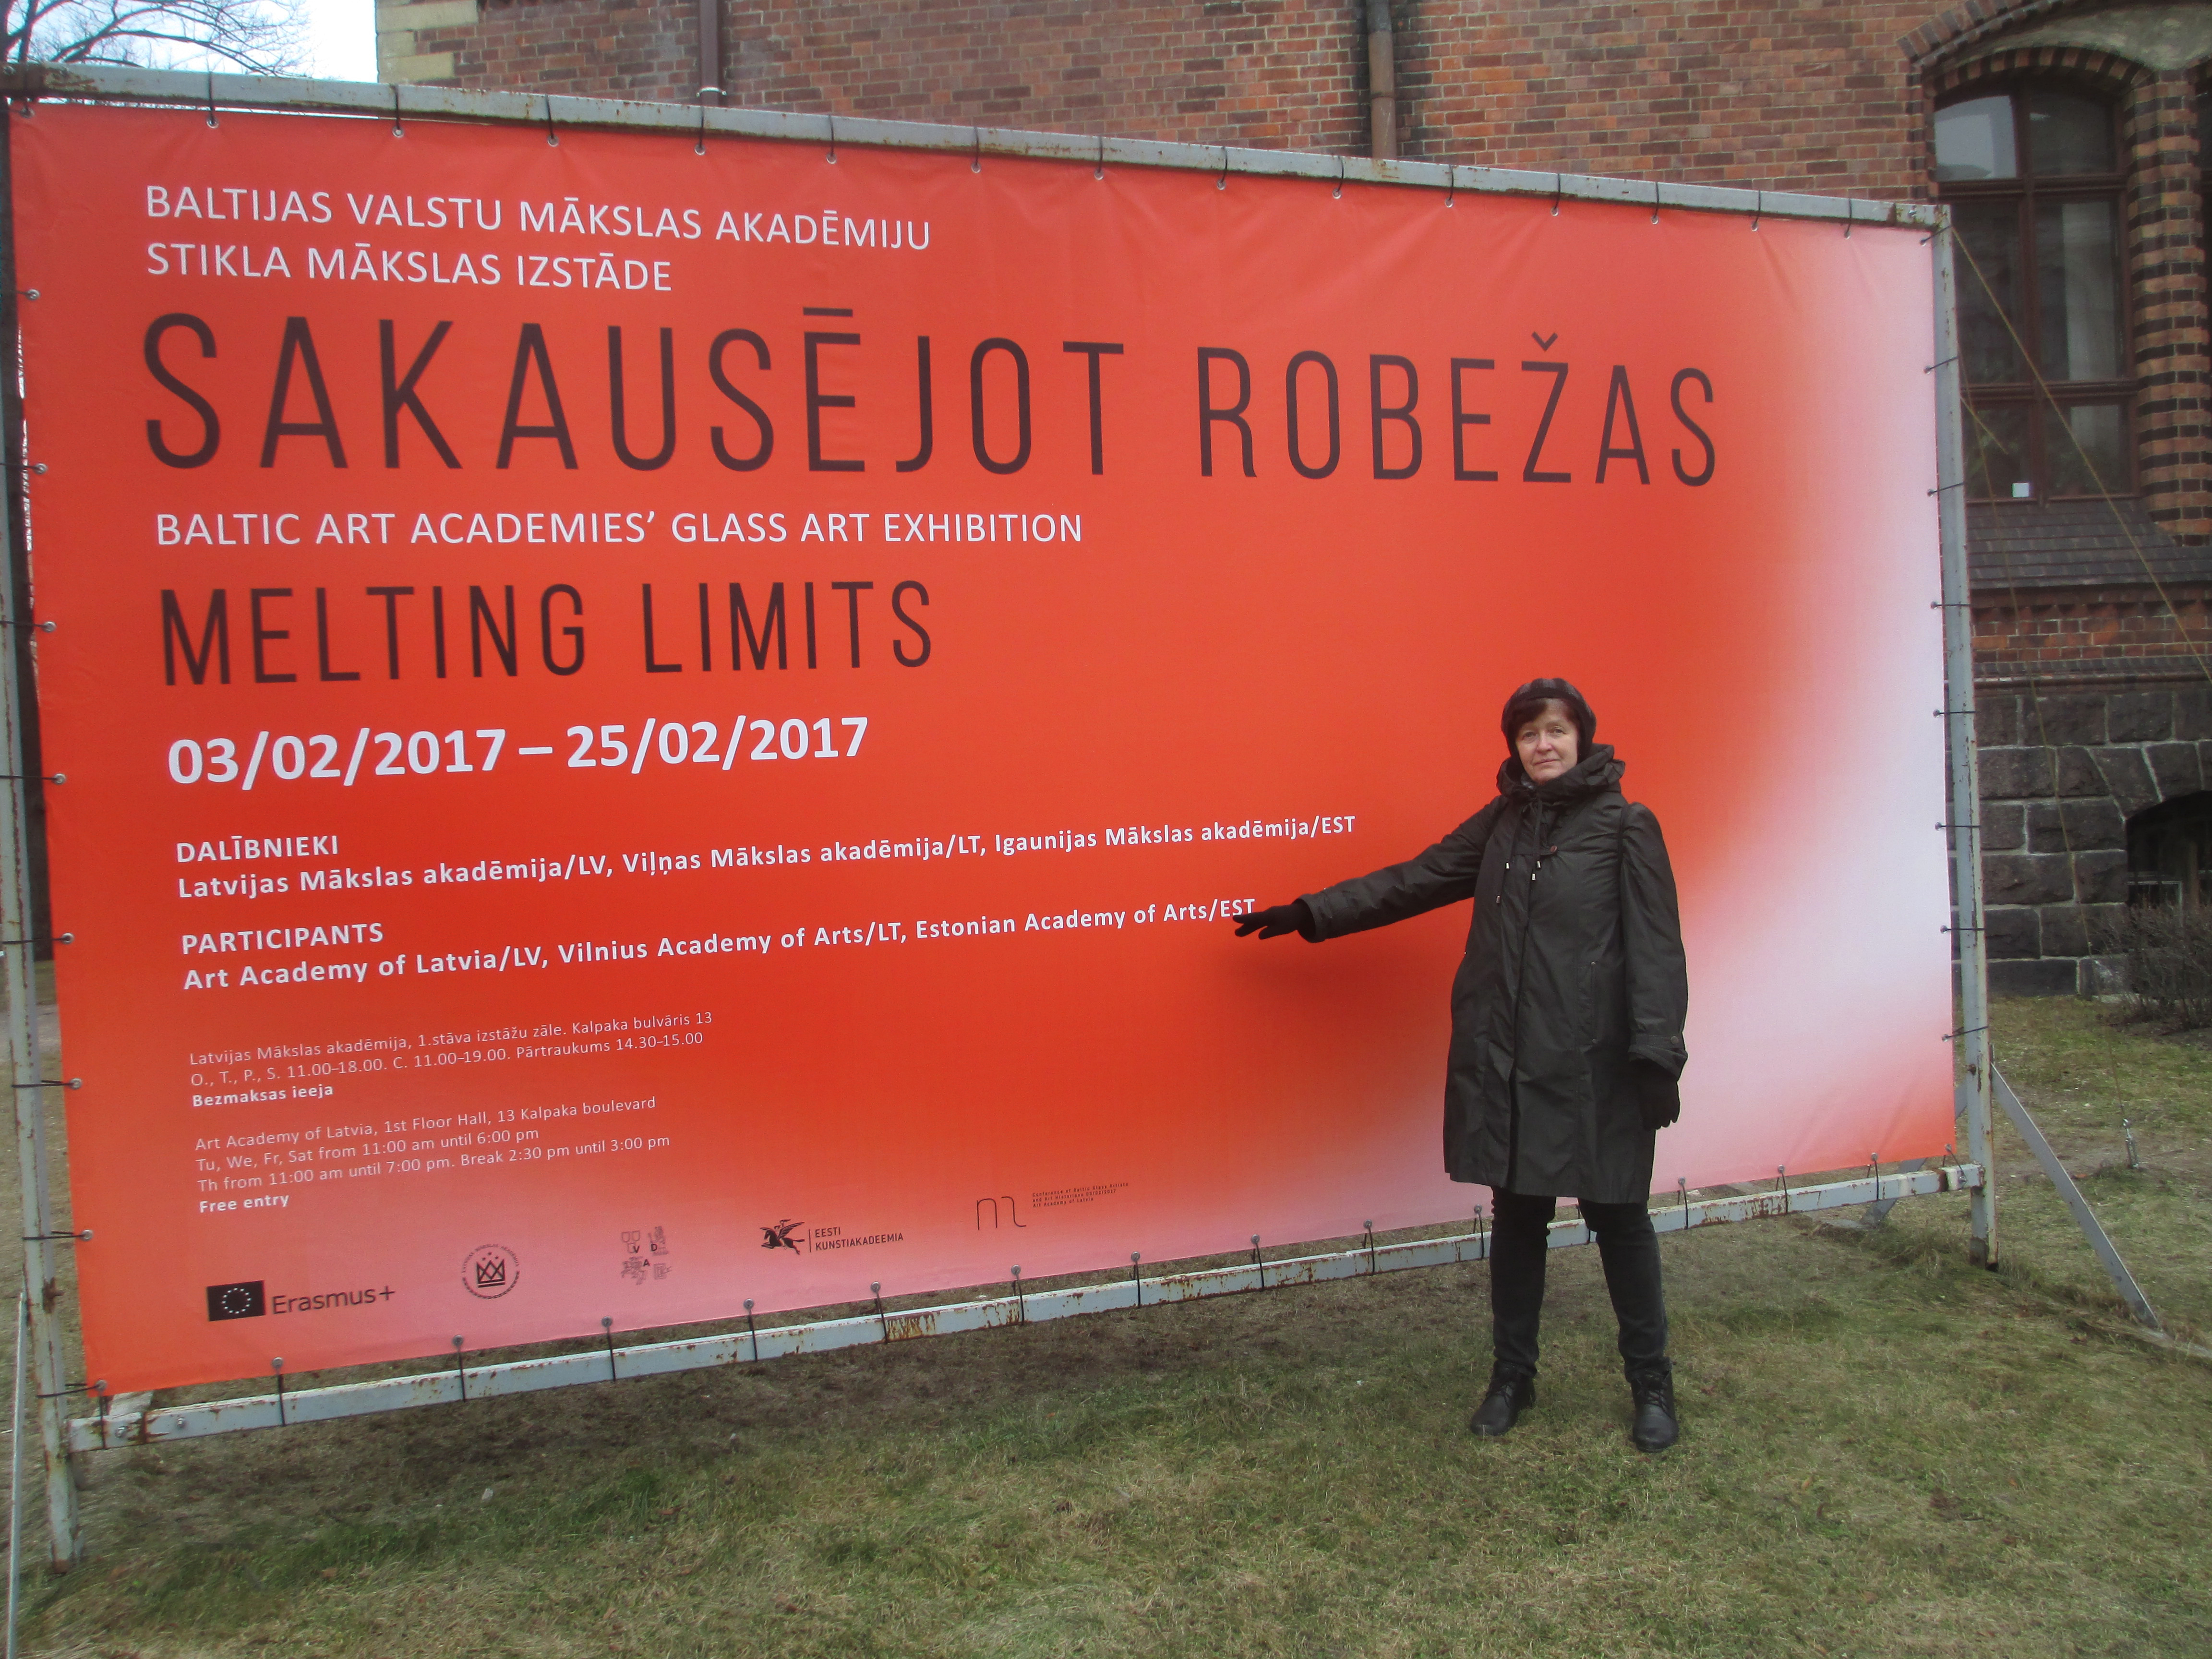 Professor Mare Saare from the Department of Glass Art with the exhibition banner